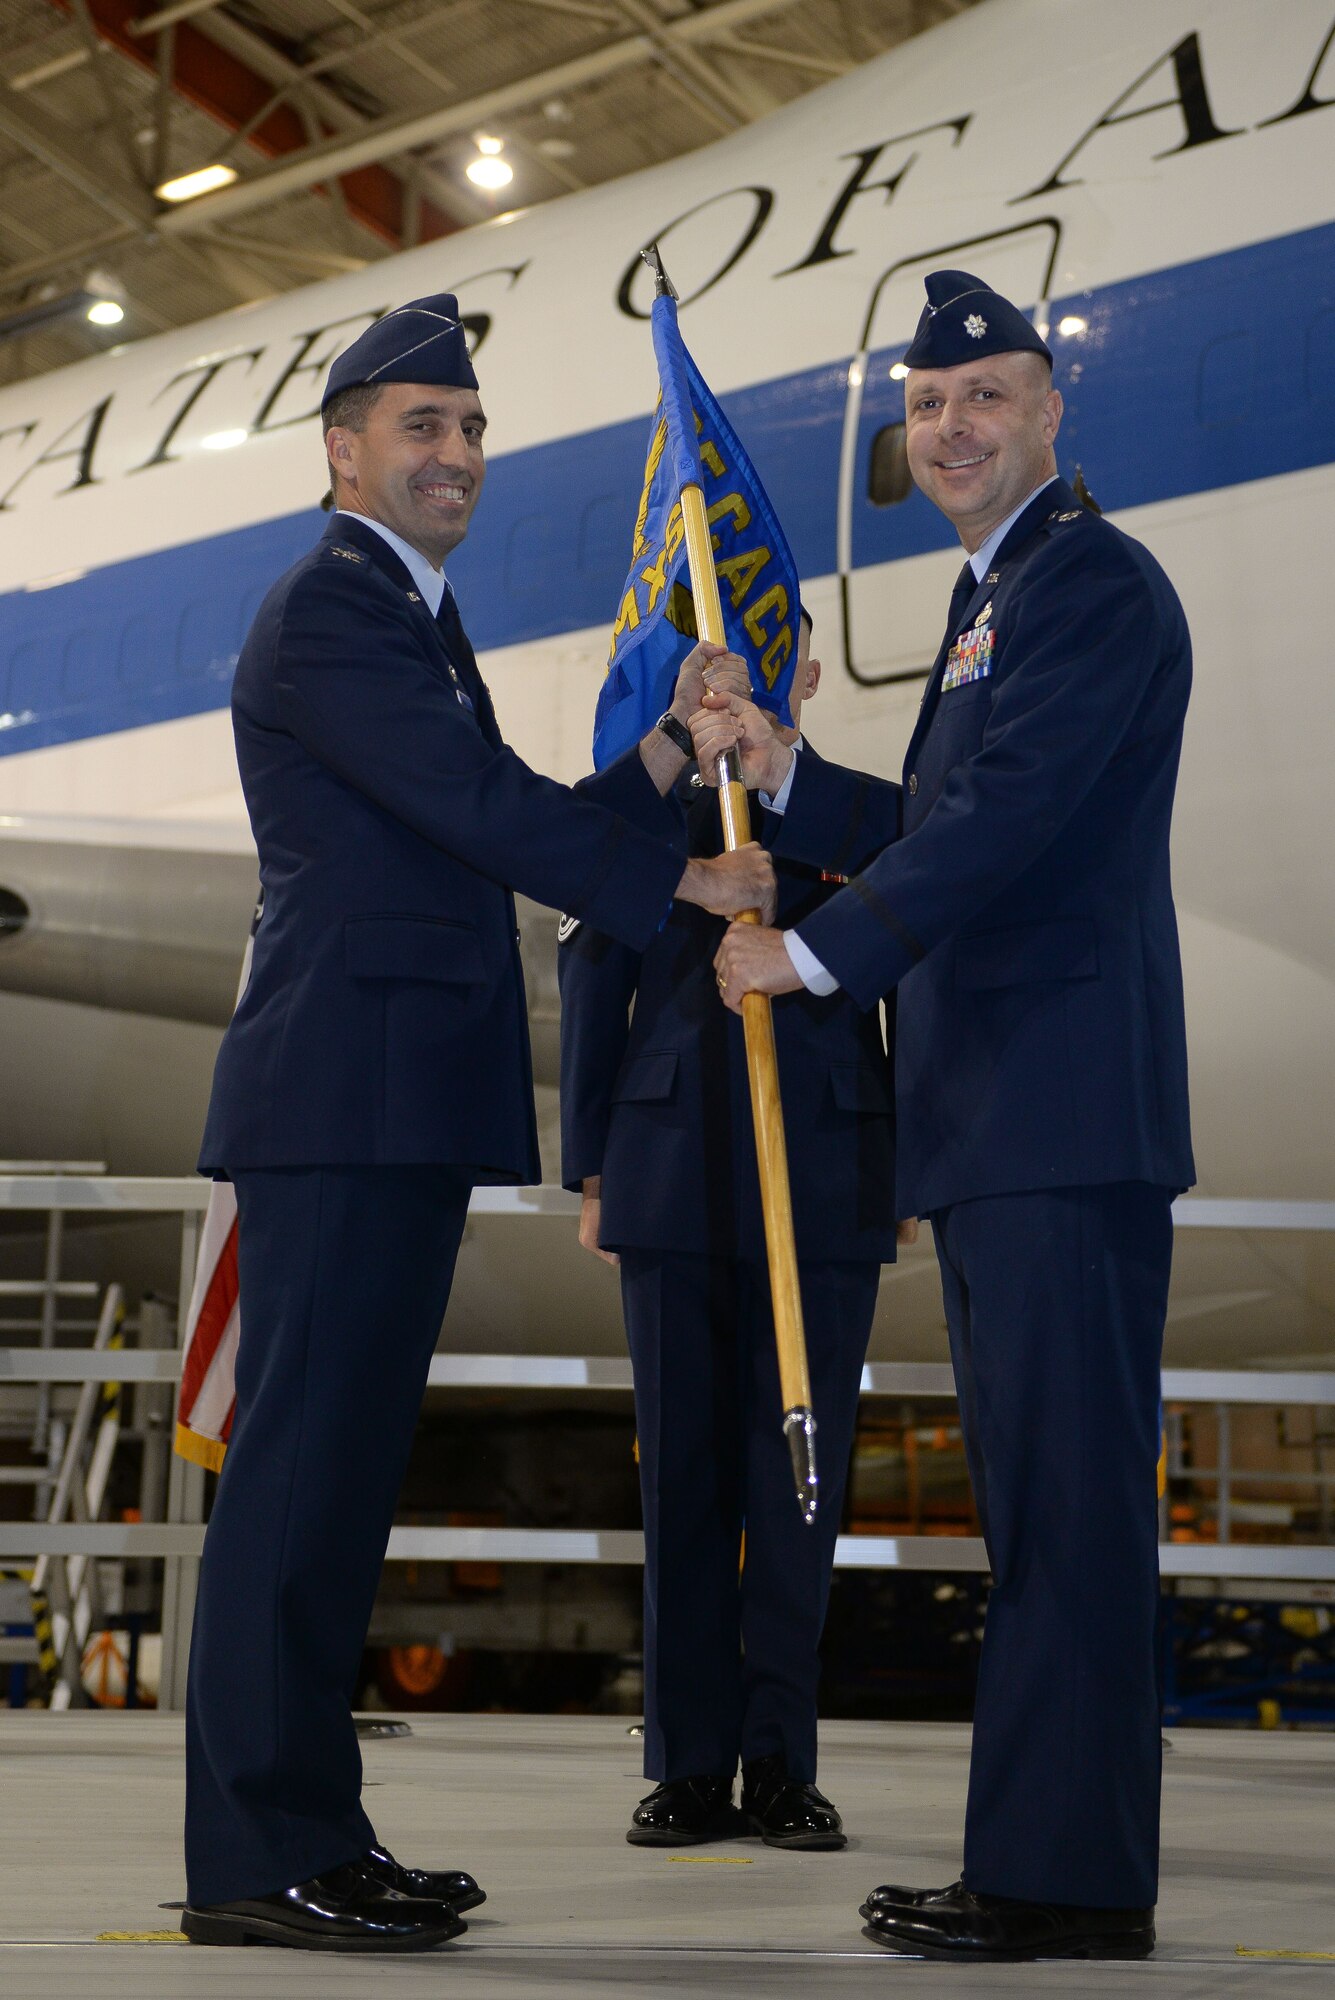 Col. Robert Billings, left, commander of the 595th Command and Control Group, passes the guidon to Lt. Col. Douglas Dodge, right, commander of the 595th Aircraft Maintenance Squadron (AMXS) at the group's activation Oct. 10, 2016. The 595th AMXS was awarded the Air Force Global Strike Command Unit Effectiveness Award Jan. 4, 2018, barely a year after the activation of the group.